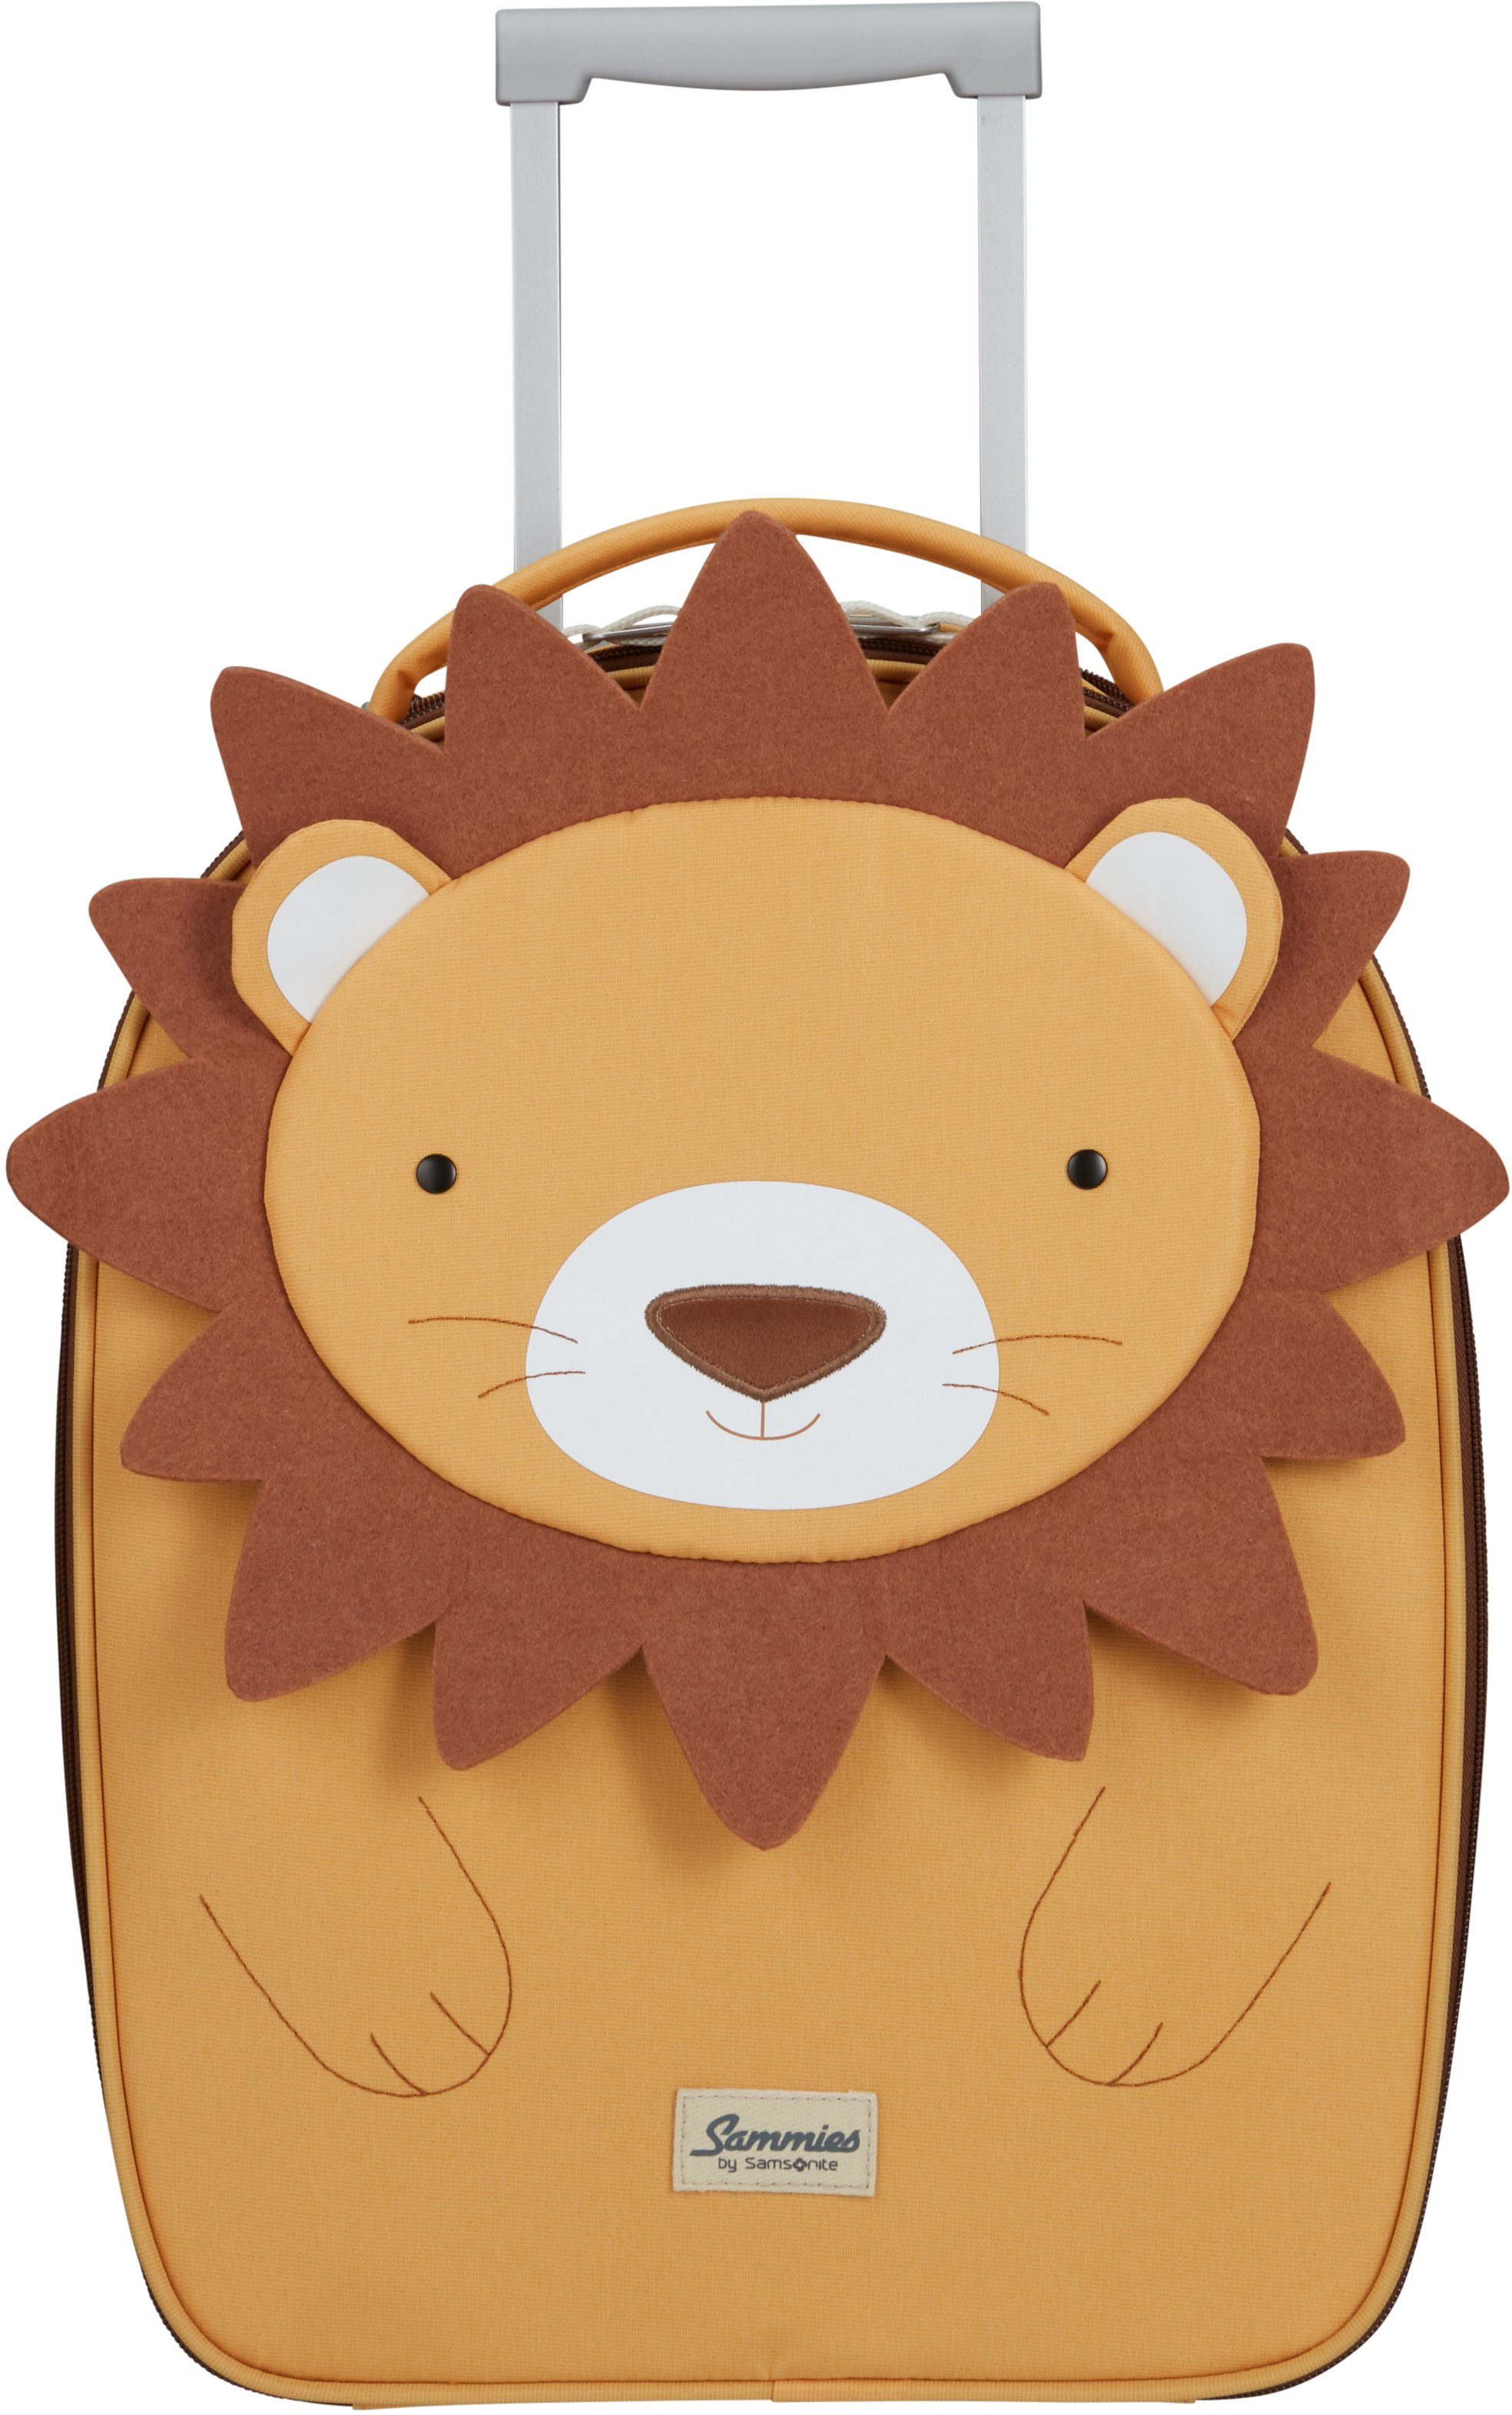 Samsonite Kinderkoffer Material ECO, 2 Happy Lion Lester, recyceltem Sammies aus Rollen